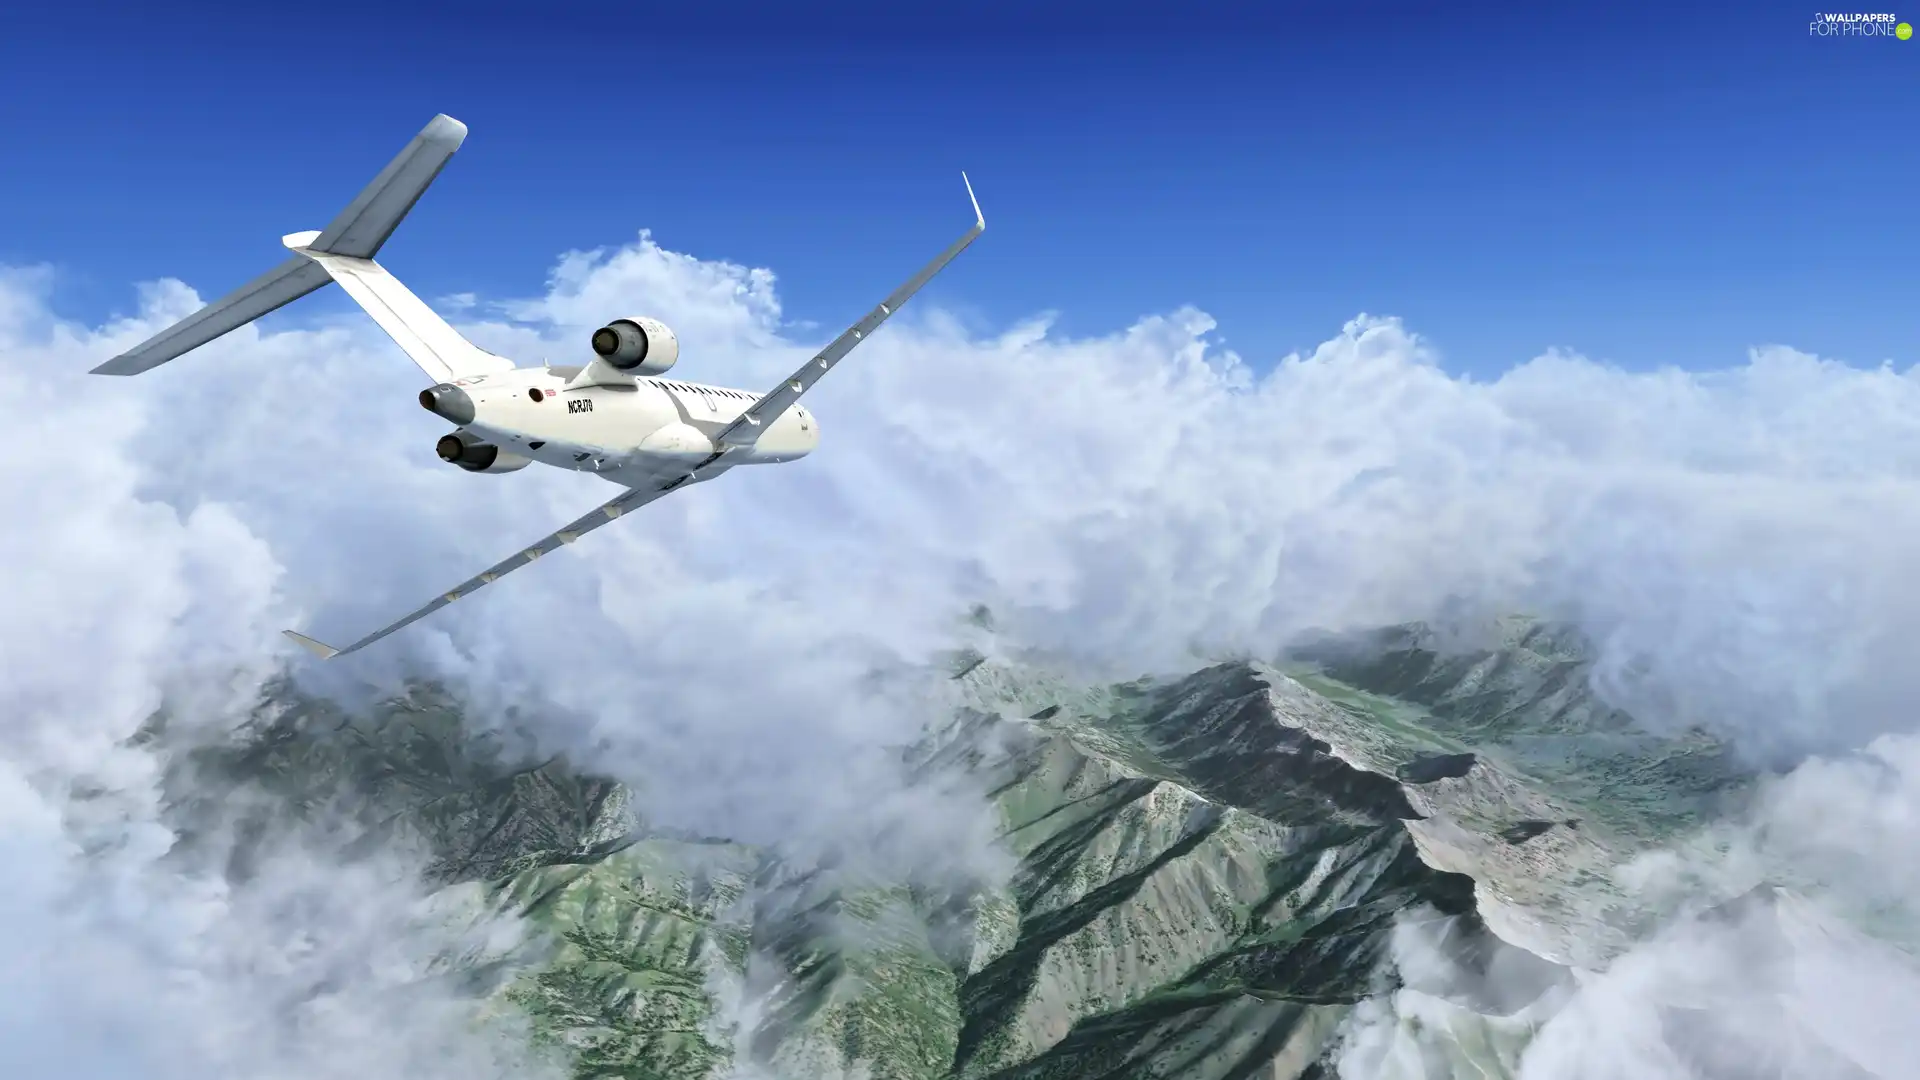 clouds, plane, Mountains